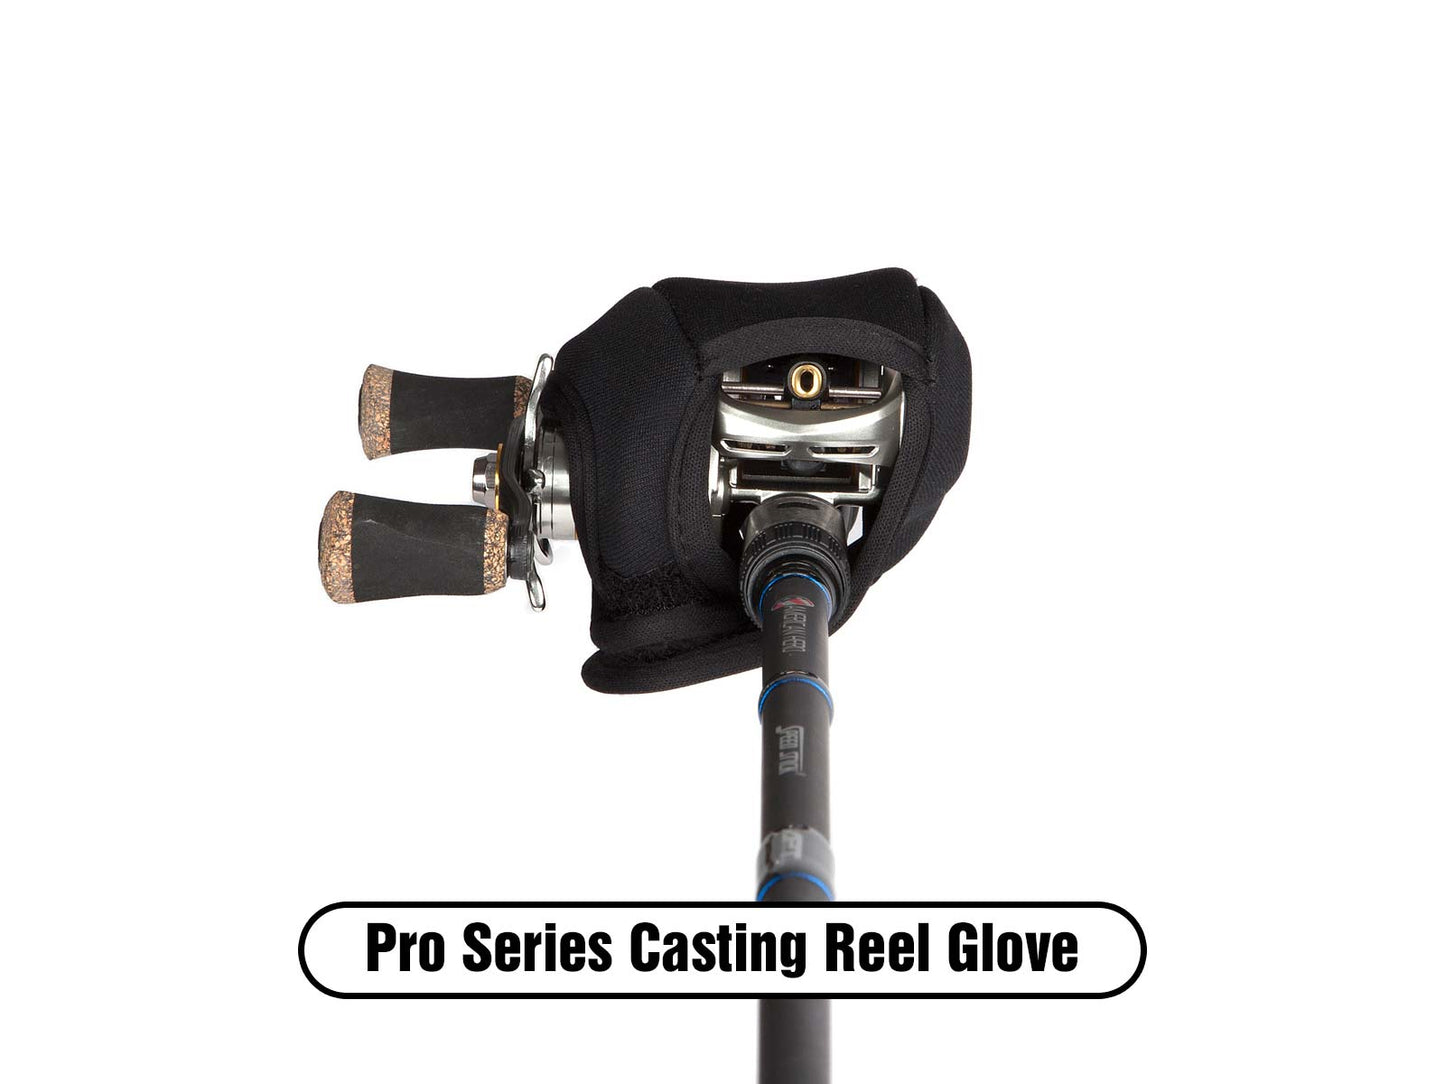 The Reel Glove - Casting